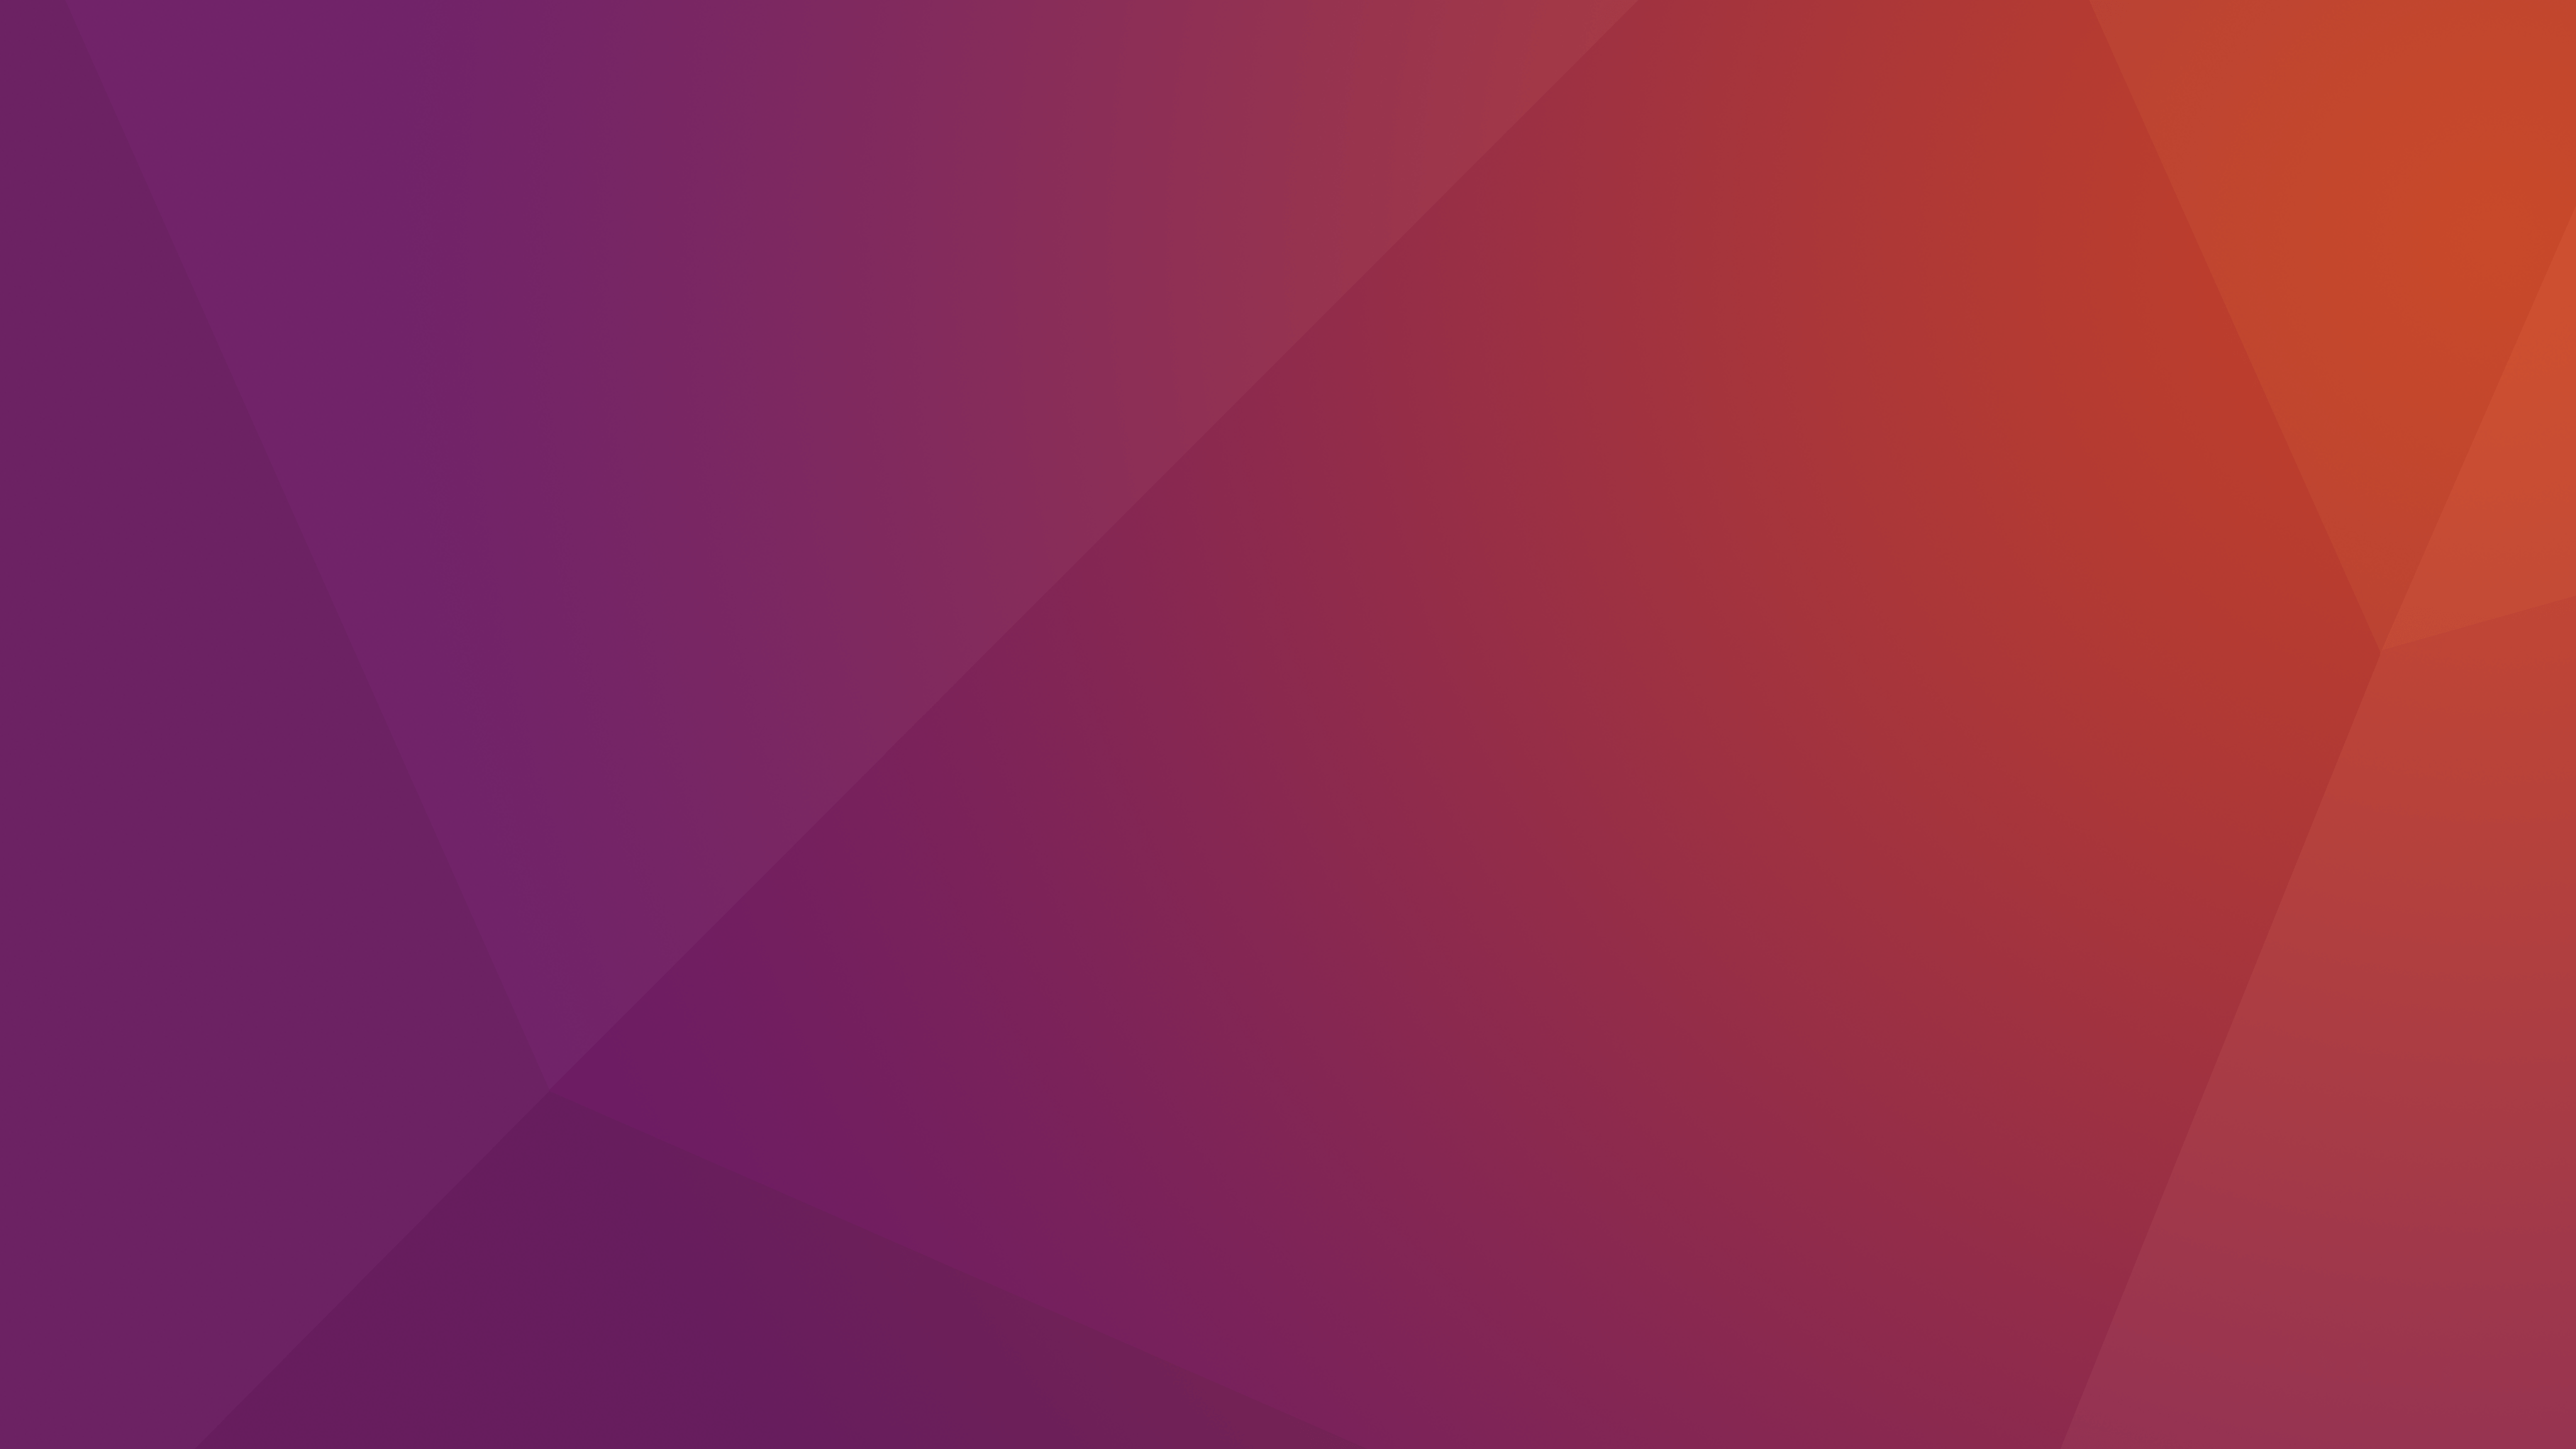 The most modern and timeless wallpaper for Ubuntu